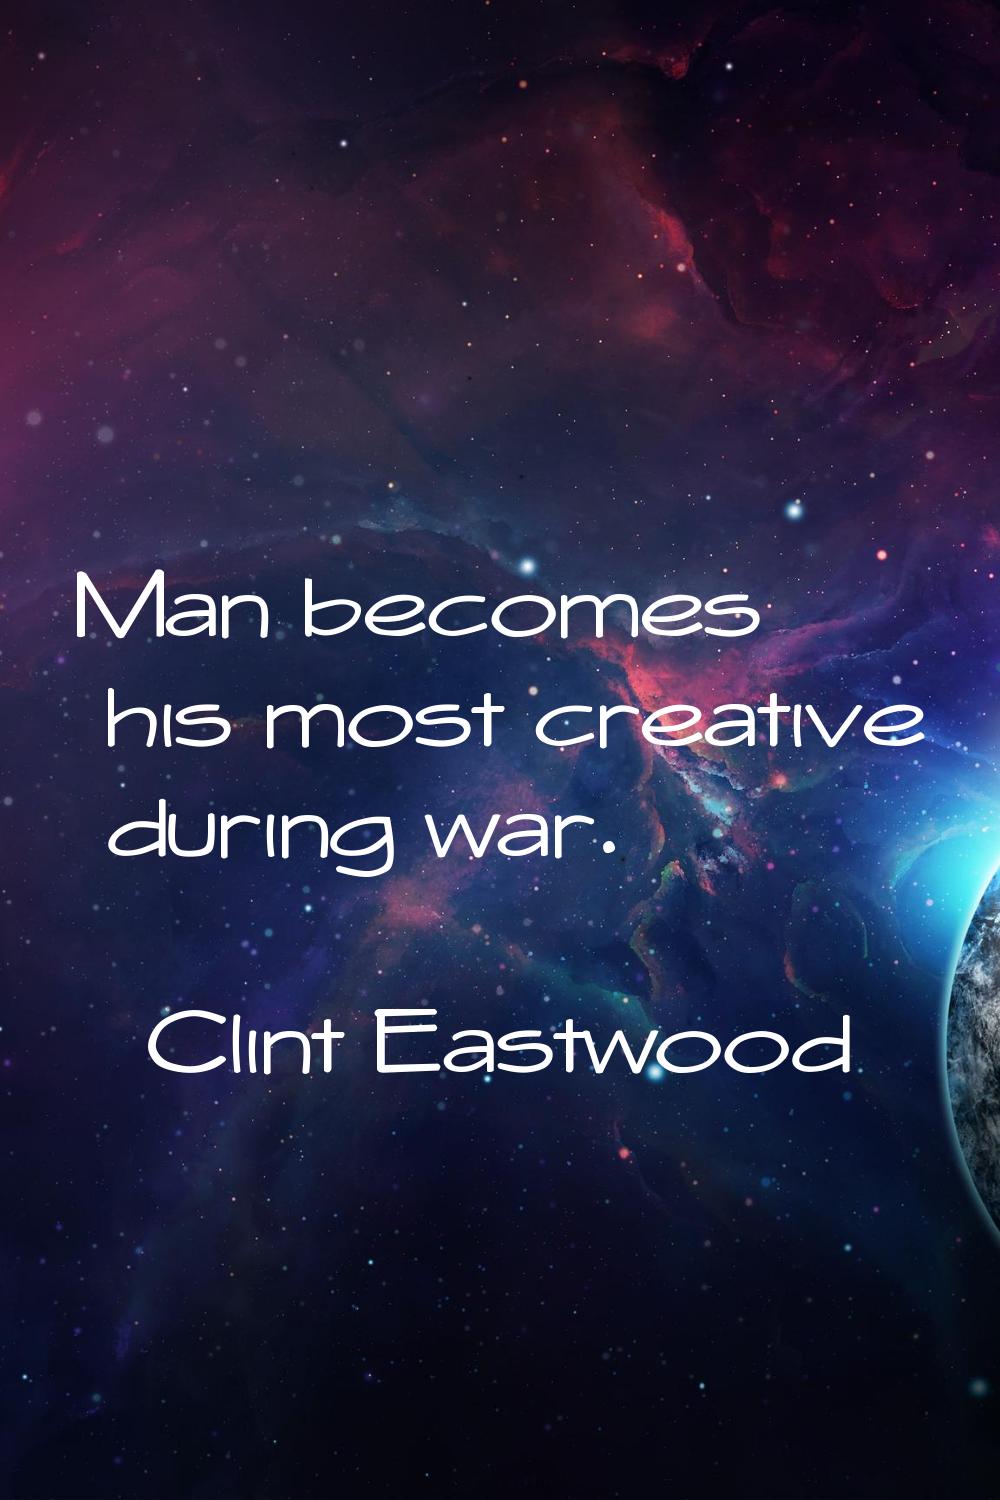 Man becomes his most creative during war.